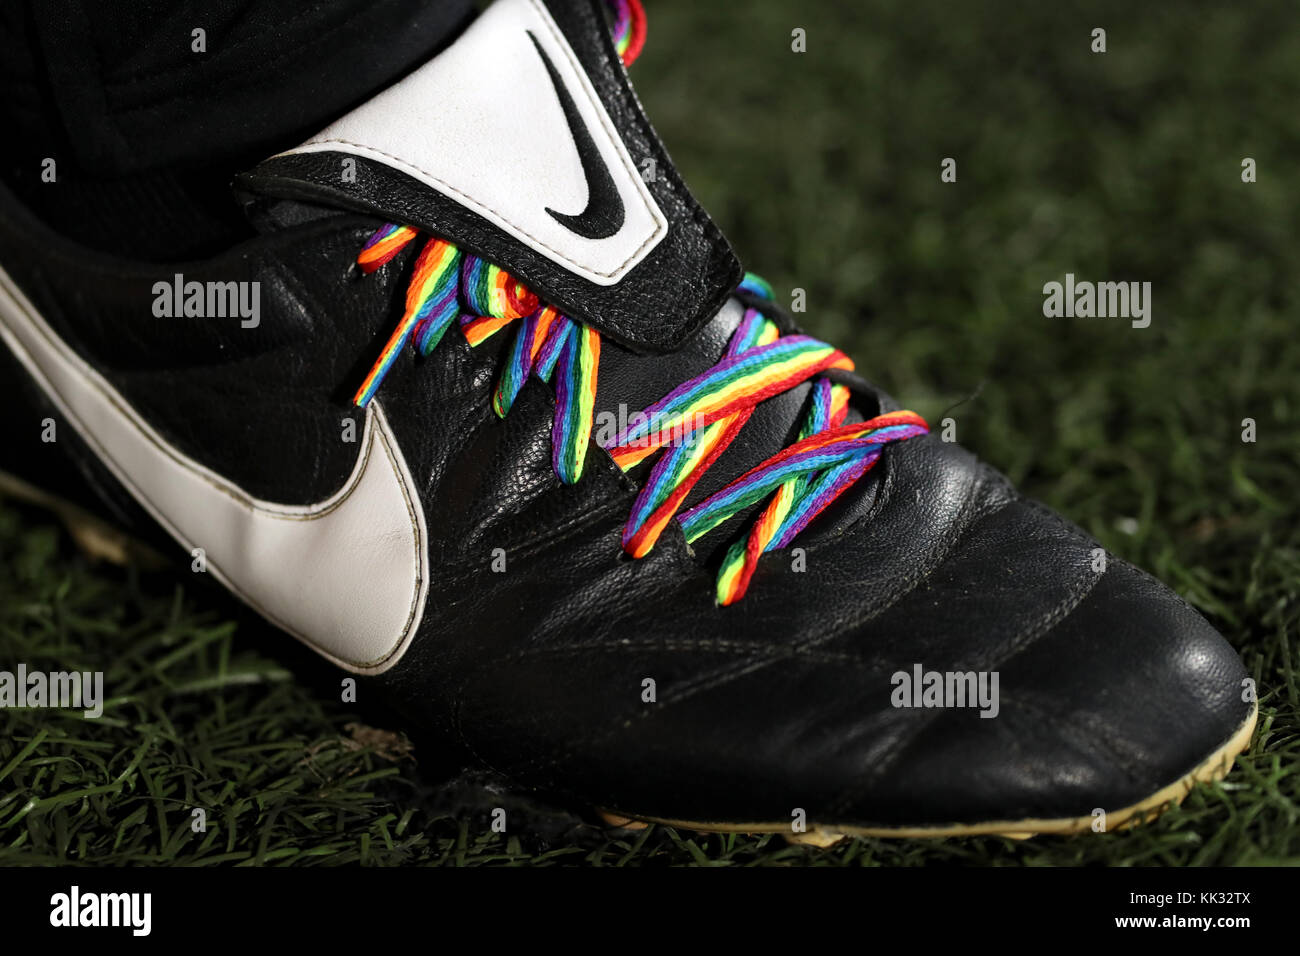 branded football boots